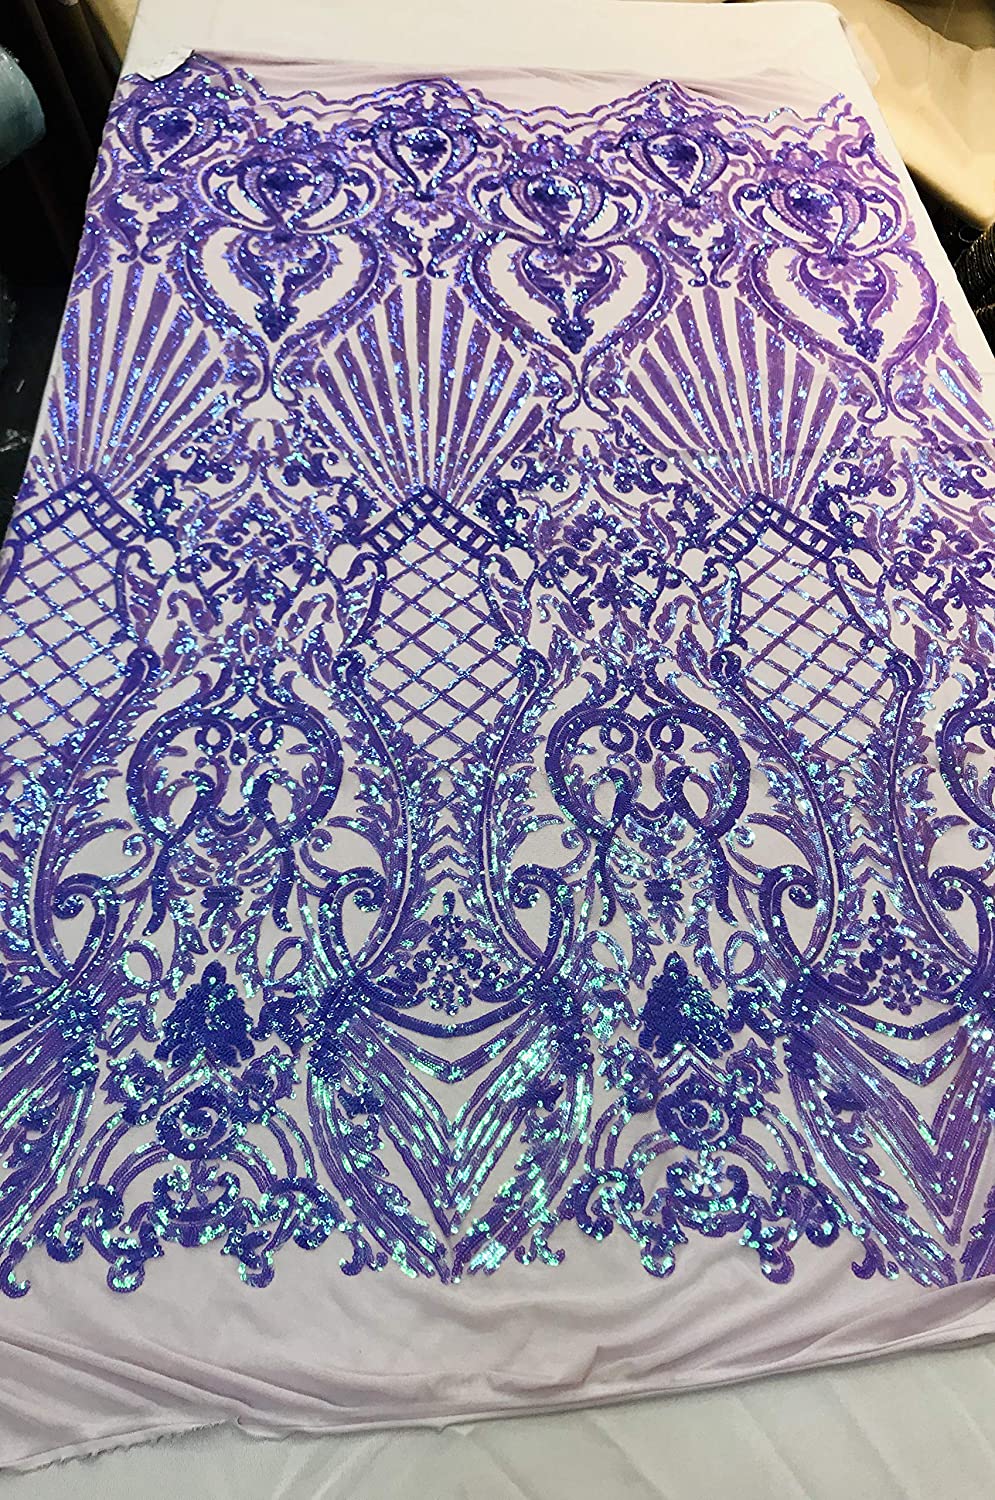 Damask Sequins Design on a 4 Way Stretch Mesh Fabric - for Night Gowns - Prom Dresses - (Lilac Iridescent, 1 Yard)